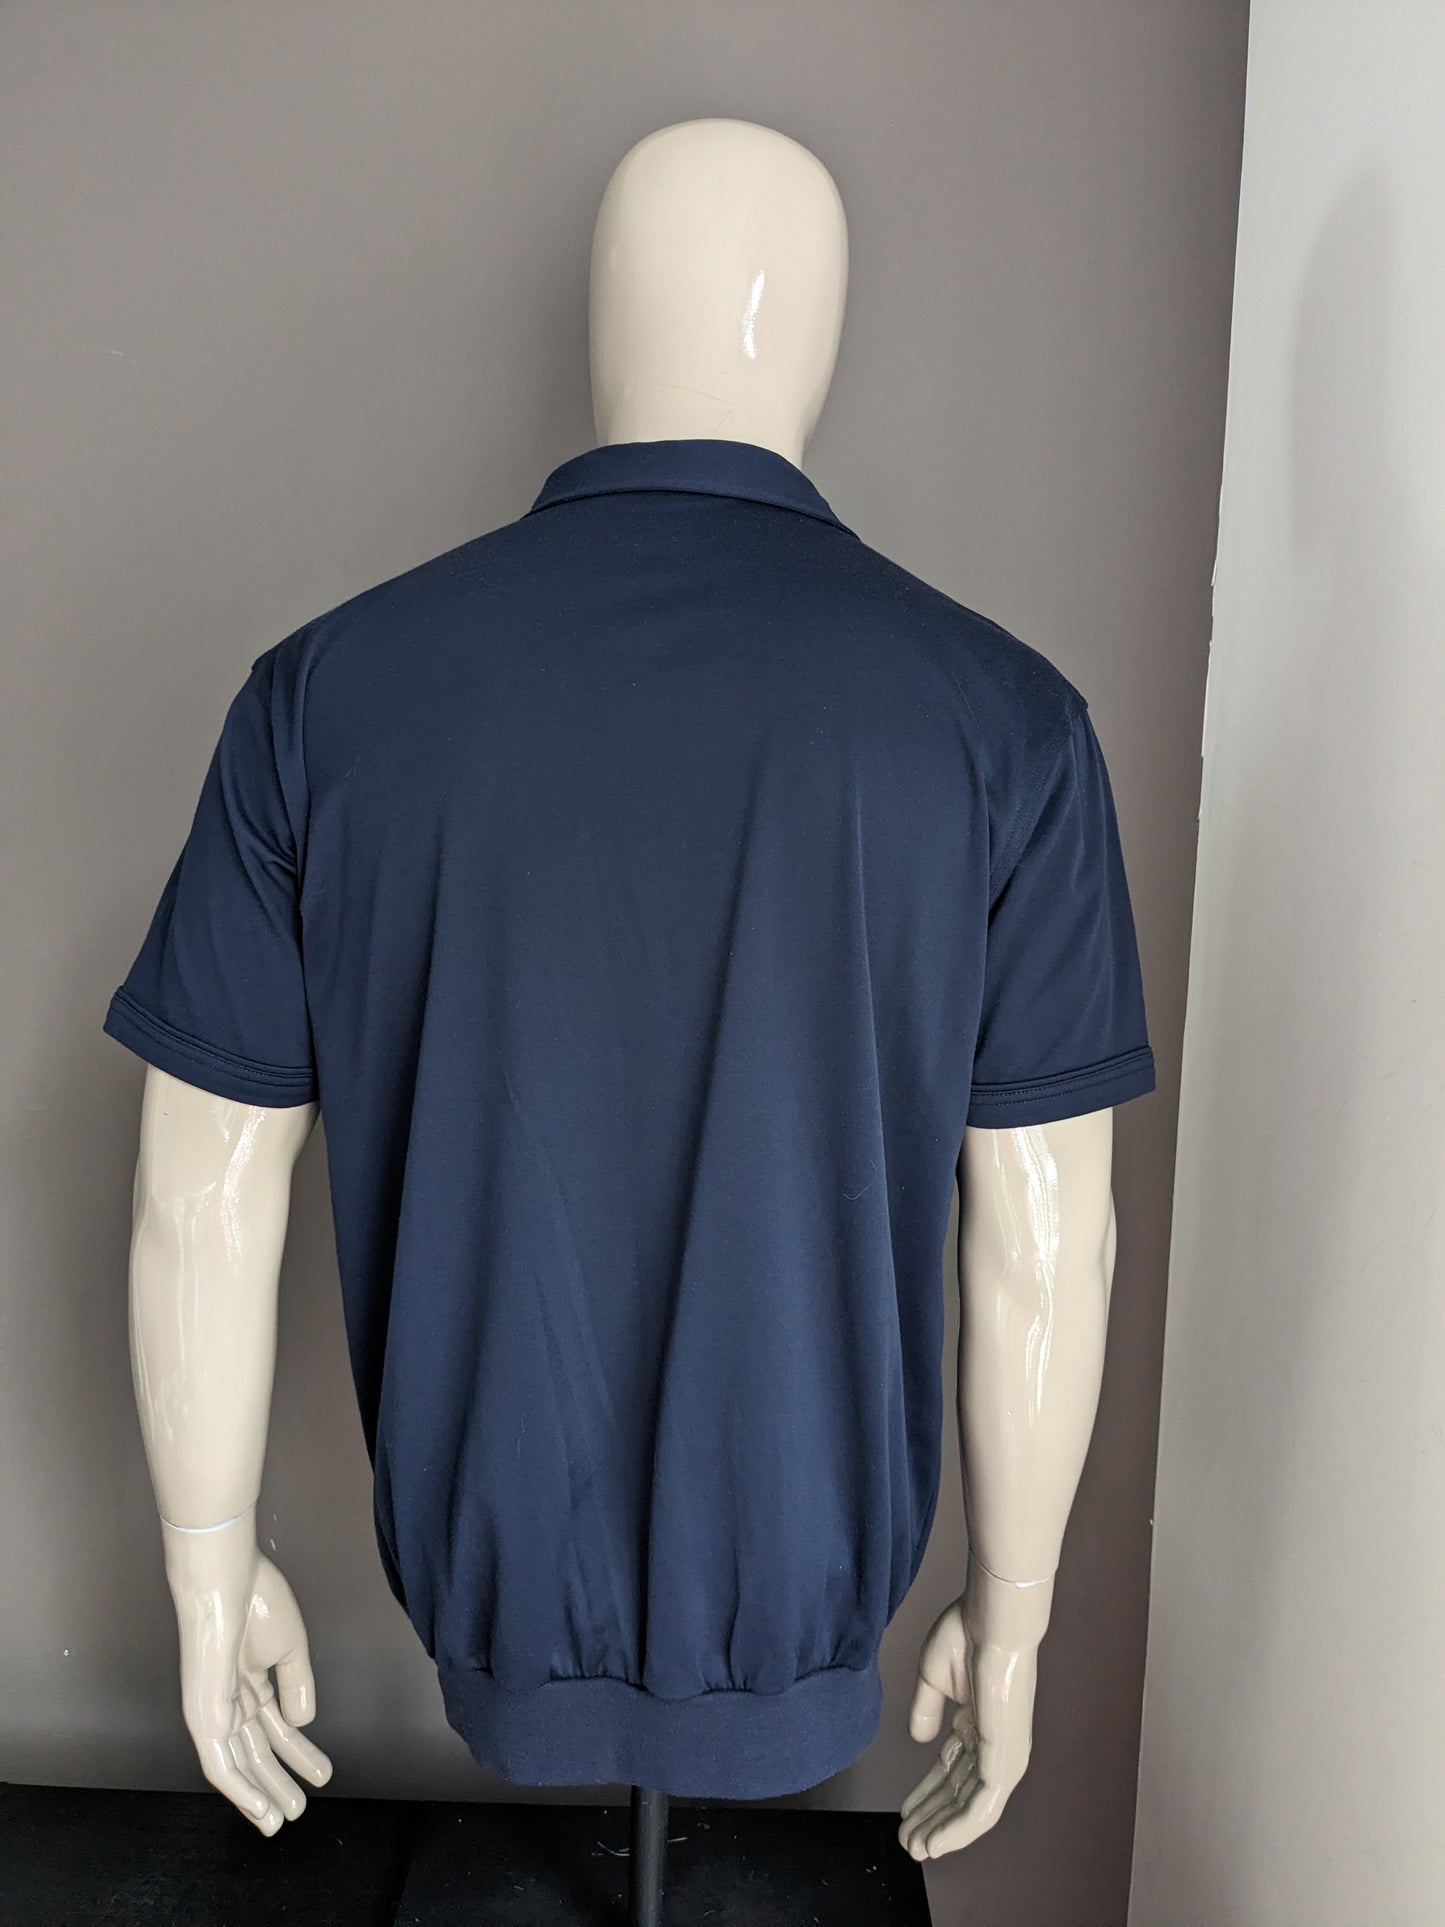 Vintage Canda Polo with elastic band. Dark blue colored. Size XL.